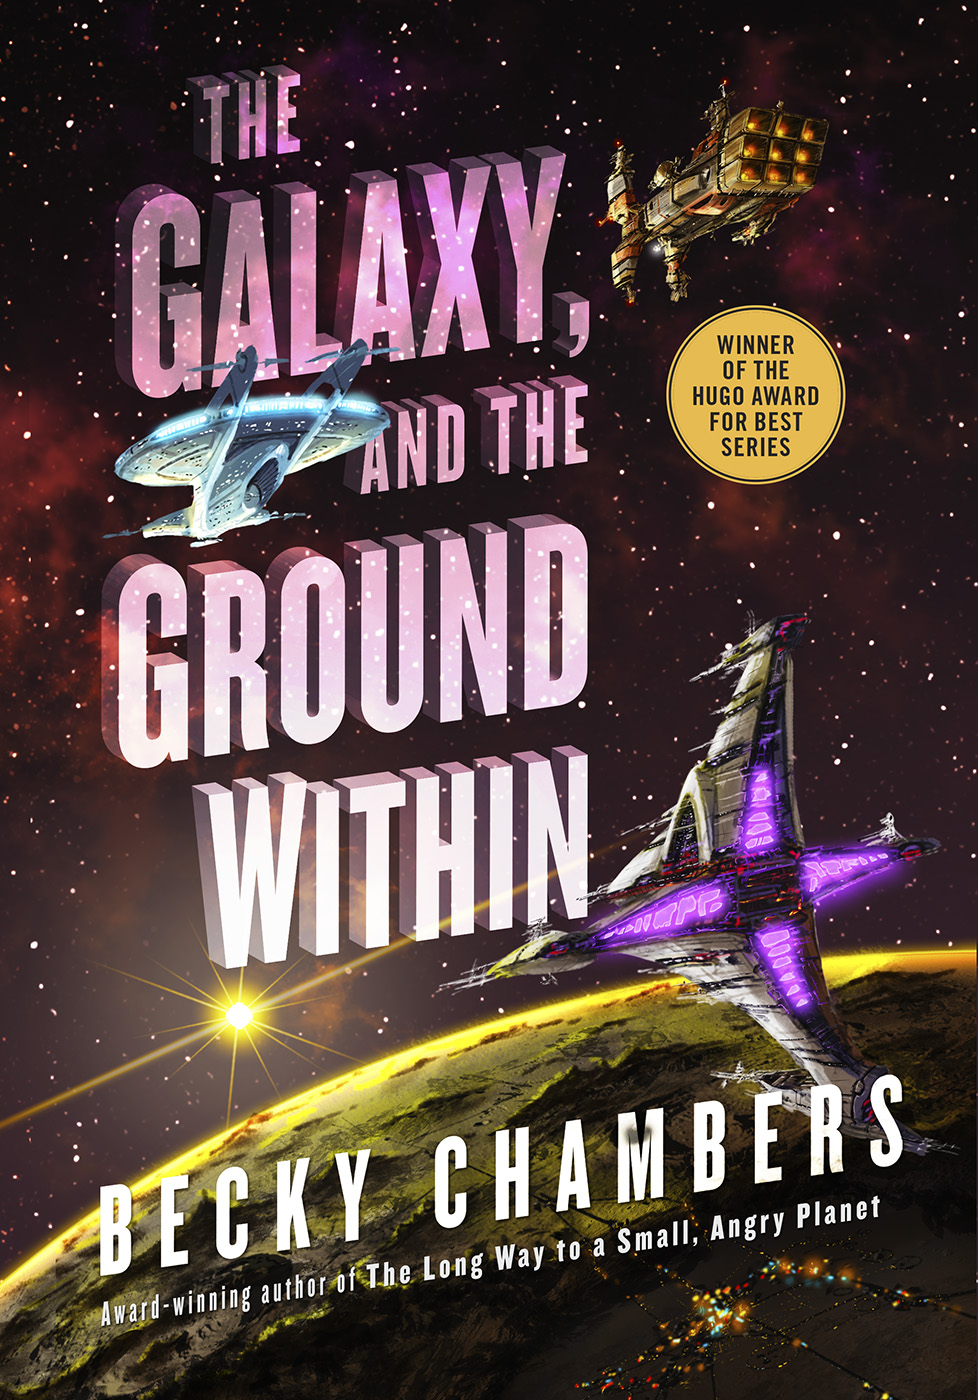 the galaxy and the ground within characters